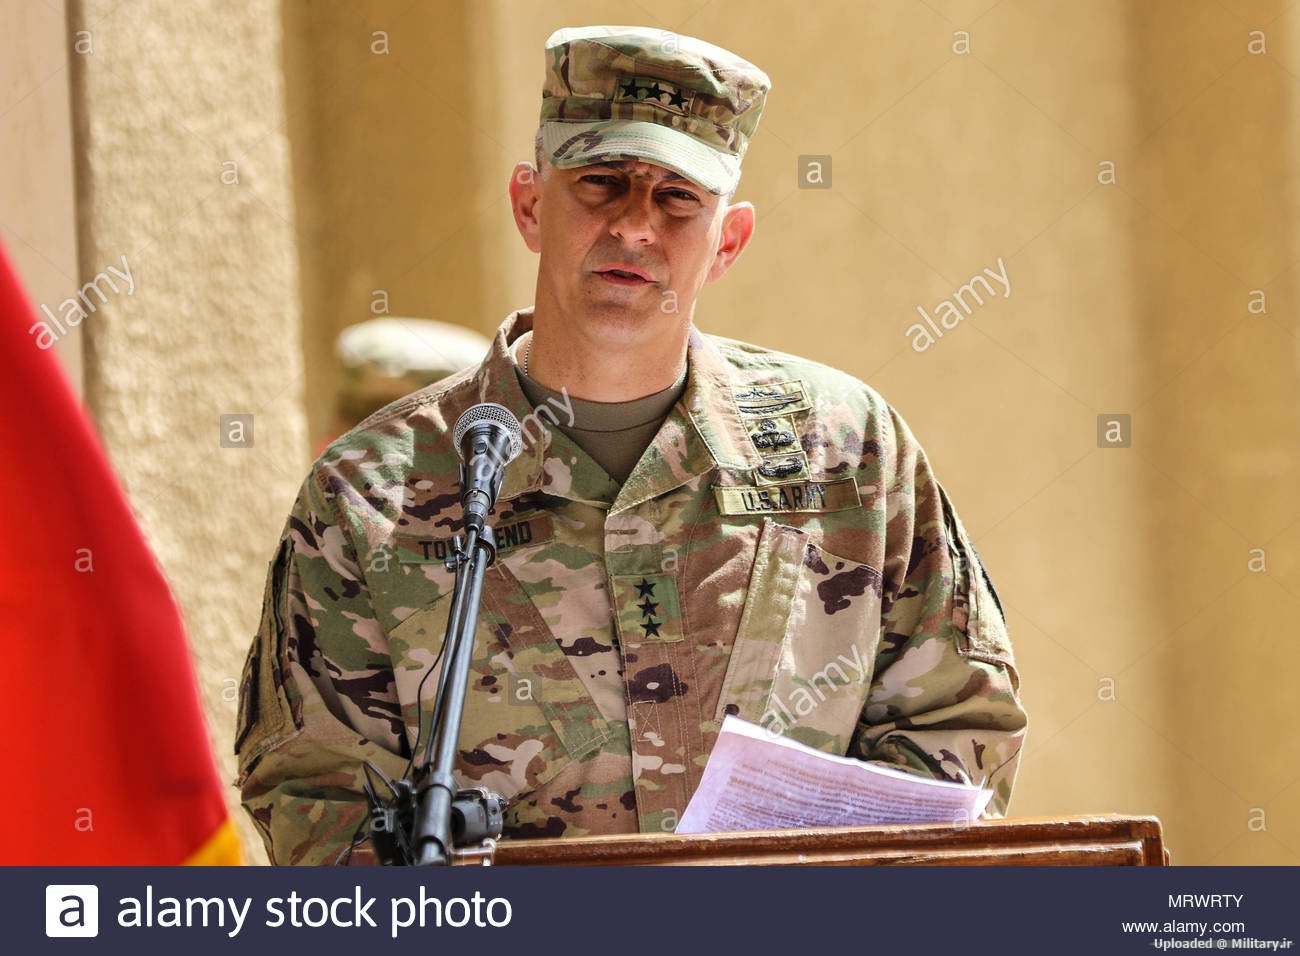 lt-gen-stephen-j-townsend-commanding-general-for-combined-joint-task-force-operation-inherent-resolve-xviii-airborne-corps-and-fort-bragg-nc-provides-his-remarks-during-the-transfer-of-authority-ceremony-for-cjf.jpg